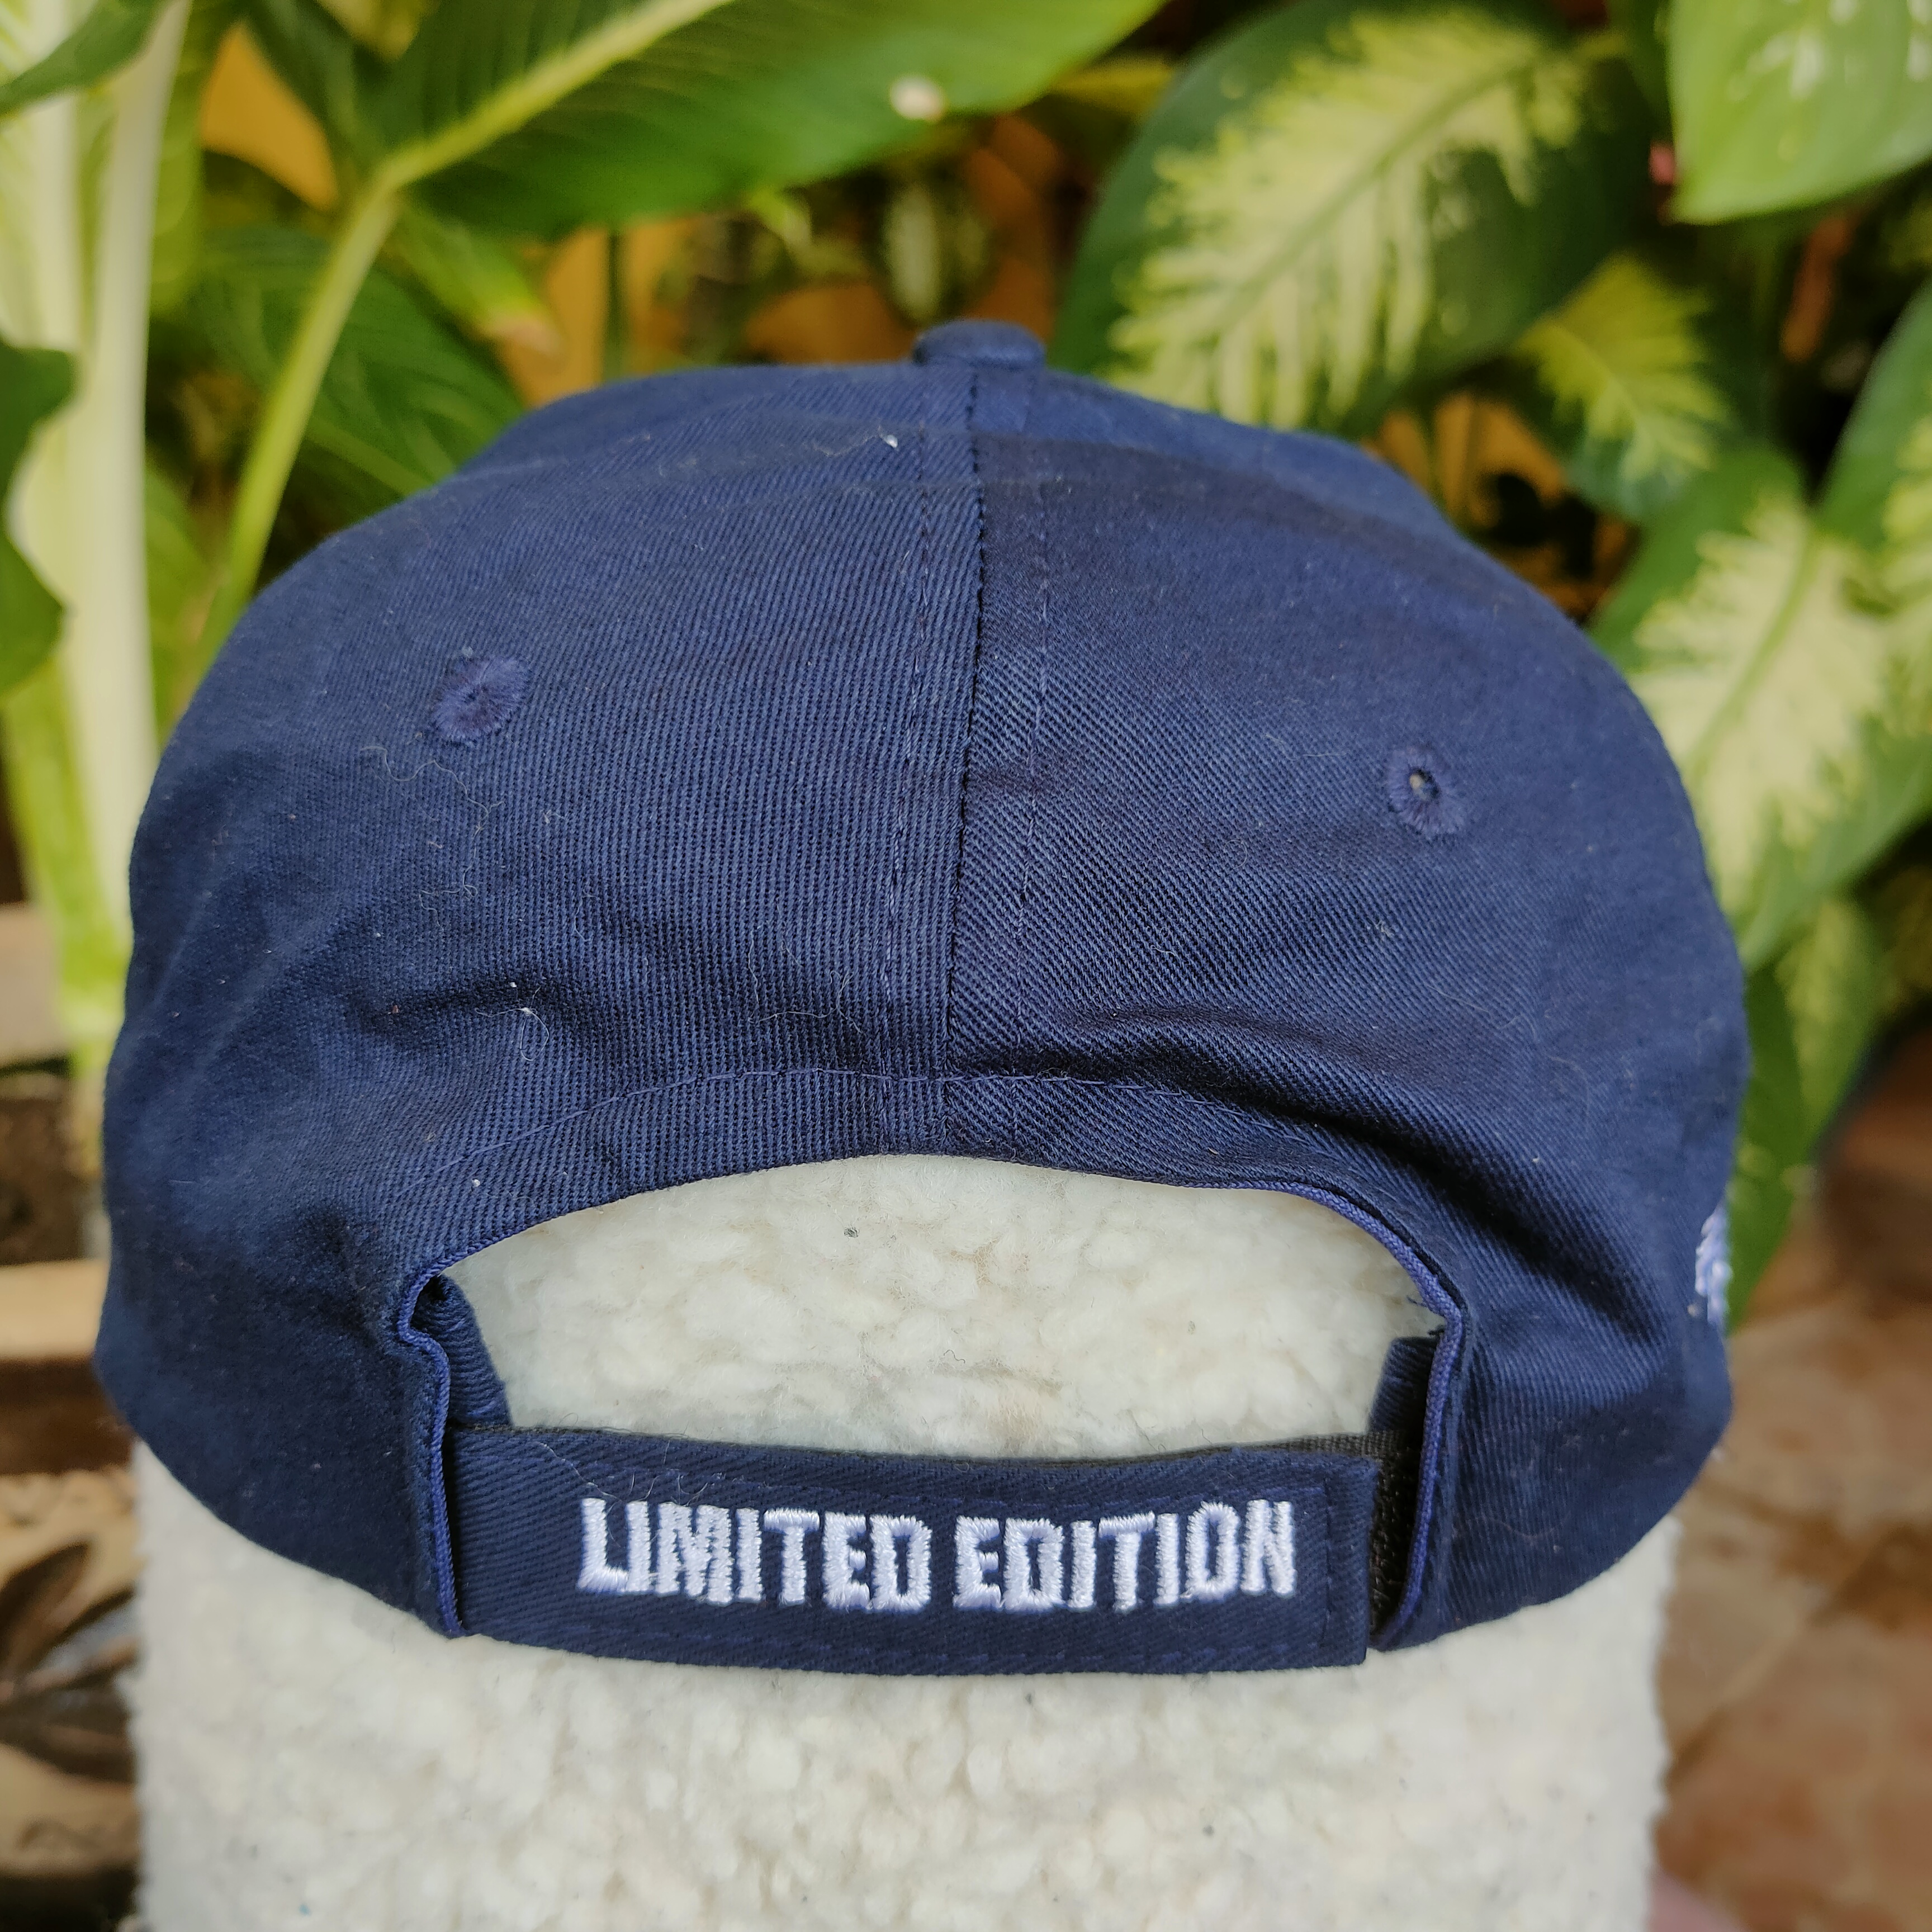 TAG HEUER Embroidery Limited Edition Cap Top Head - 4